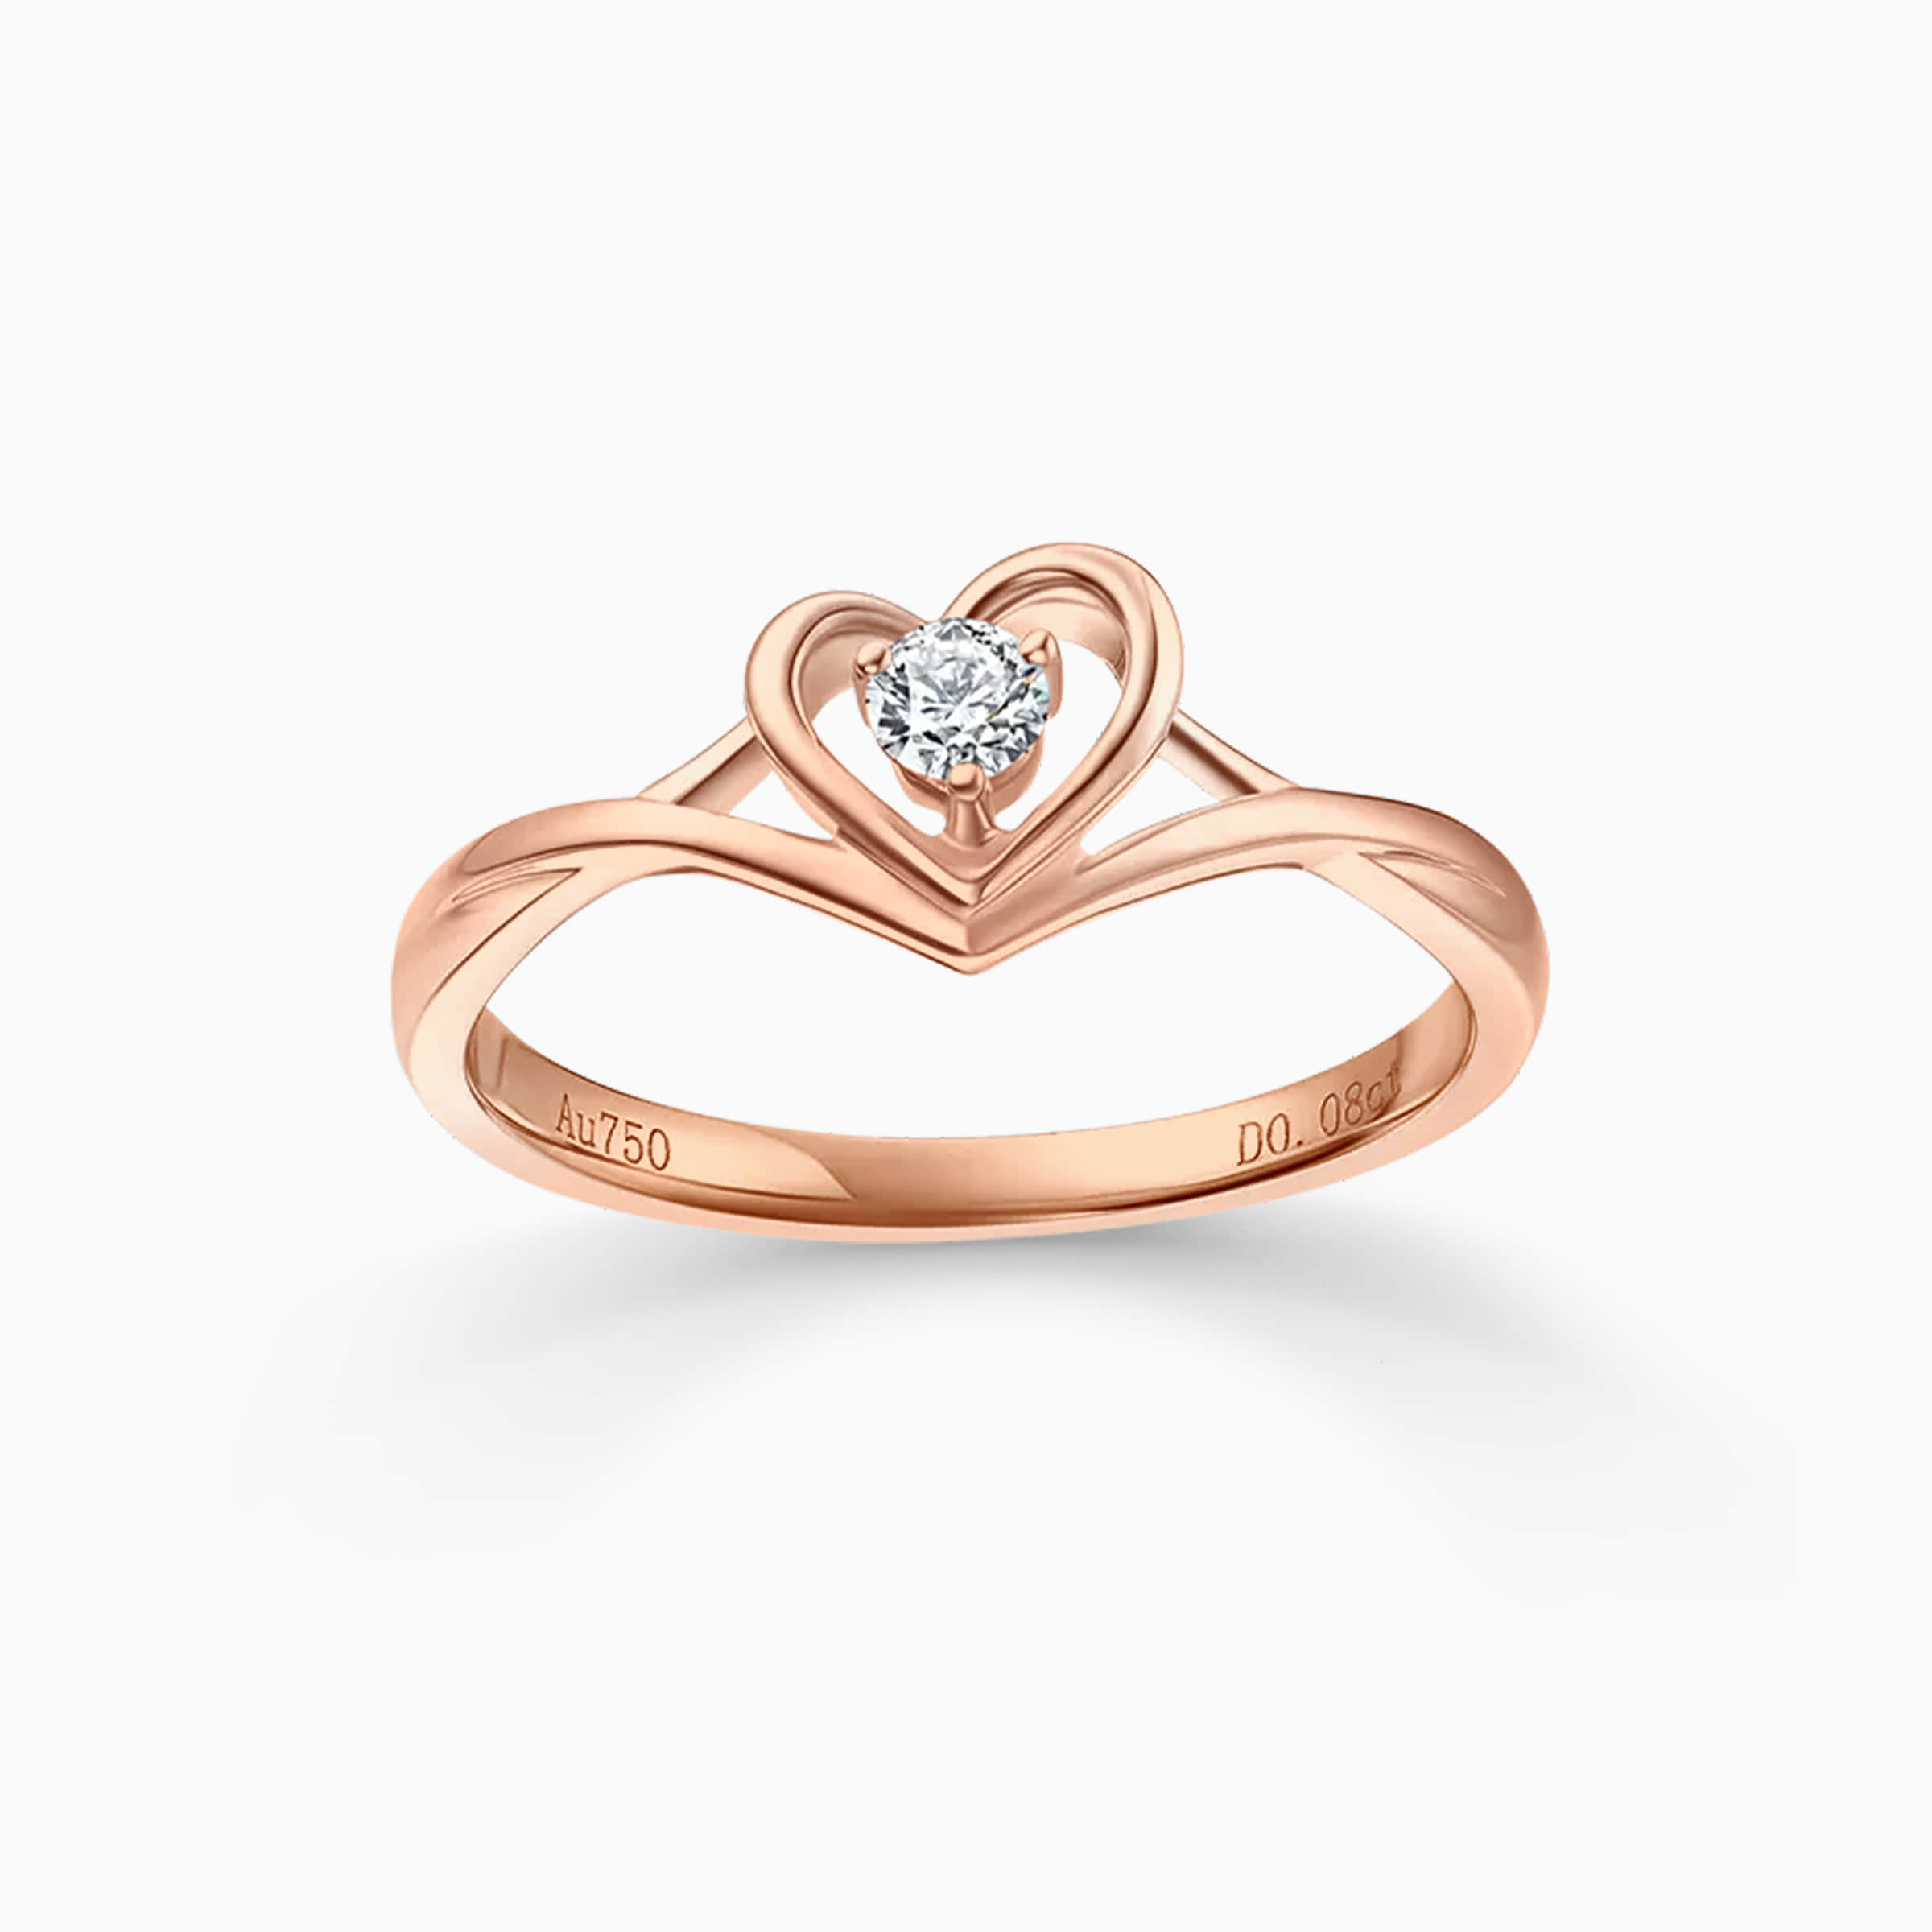 Darry Ring simple promise ring rose gold